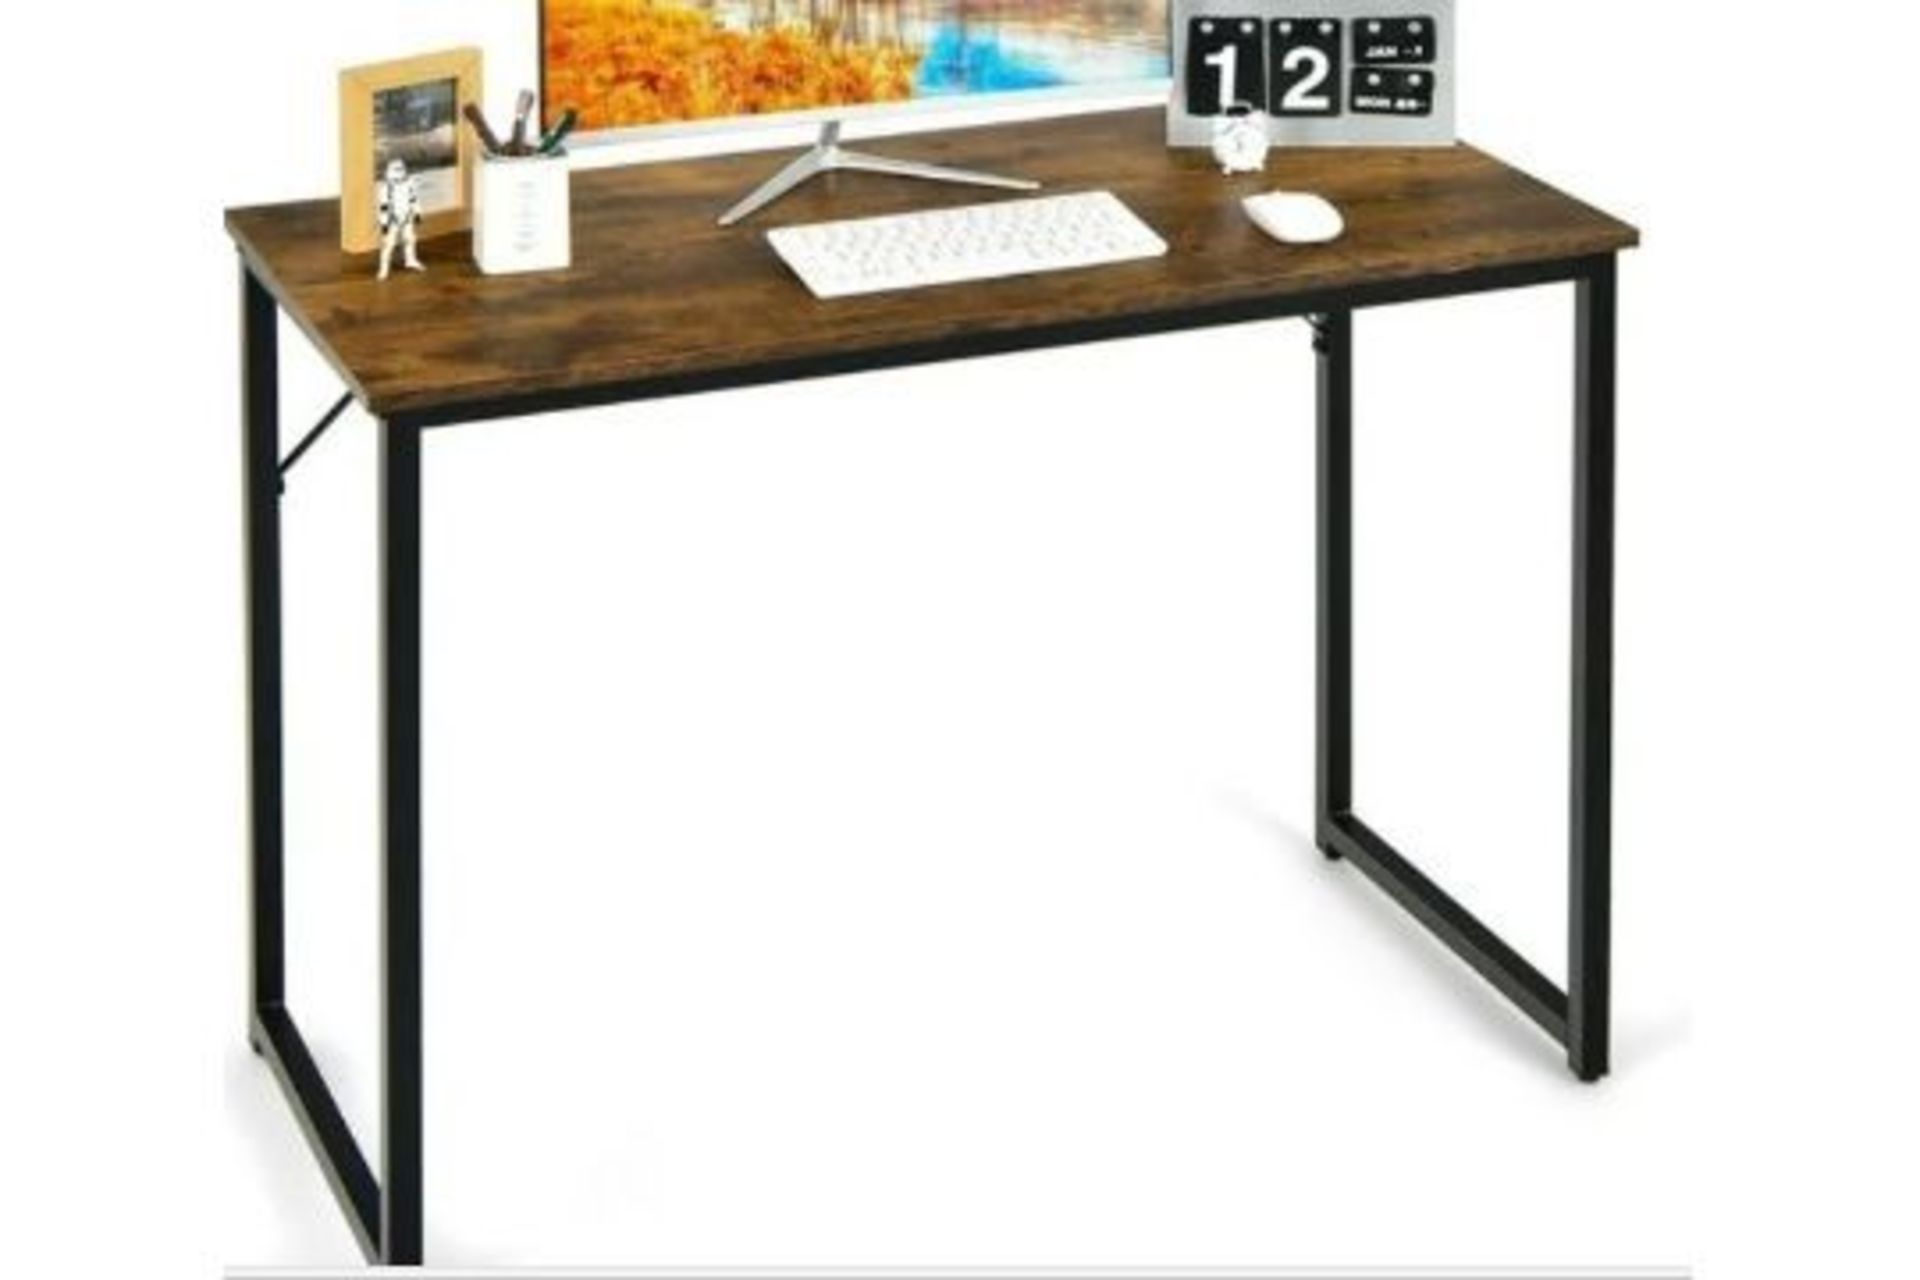 Computer Desk Writing Workstation Study Laptop Table Home Office. - R14.2. Our modern simple desk